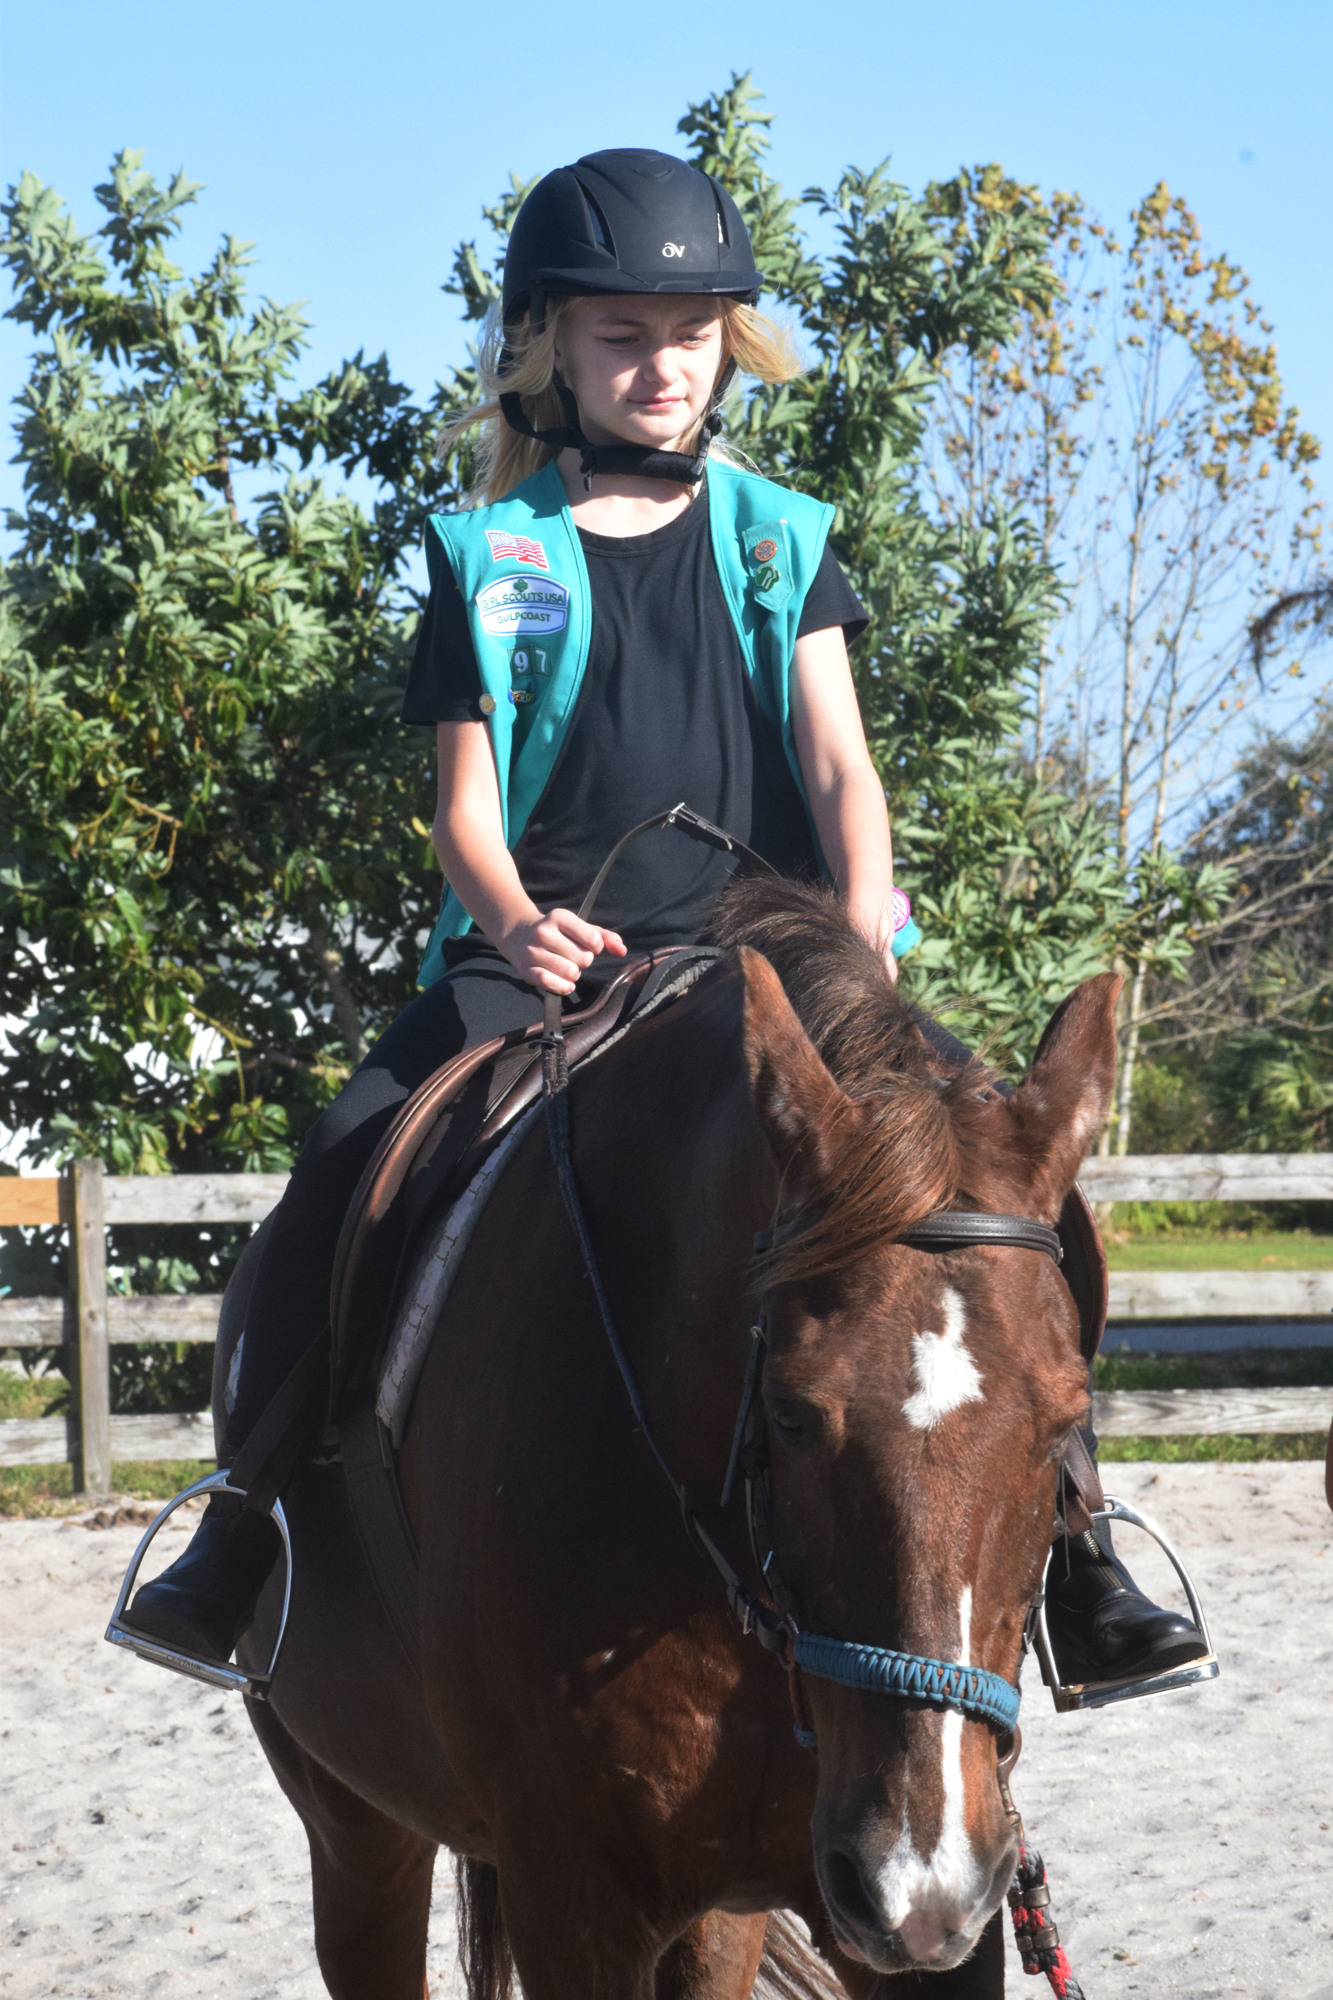 Jenna Jahn, a member of Girl Scout Troop 97, loves horseback riding and enjoyed sharing the experience with her fellow scouts. Photo by Liz Ramos.